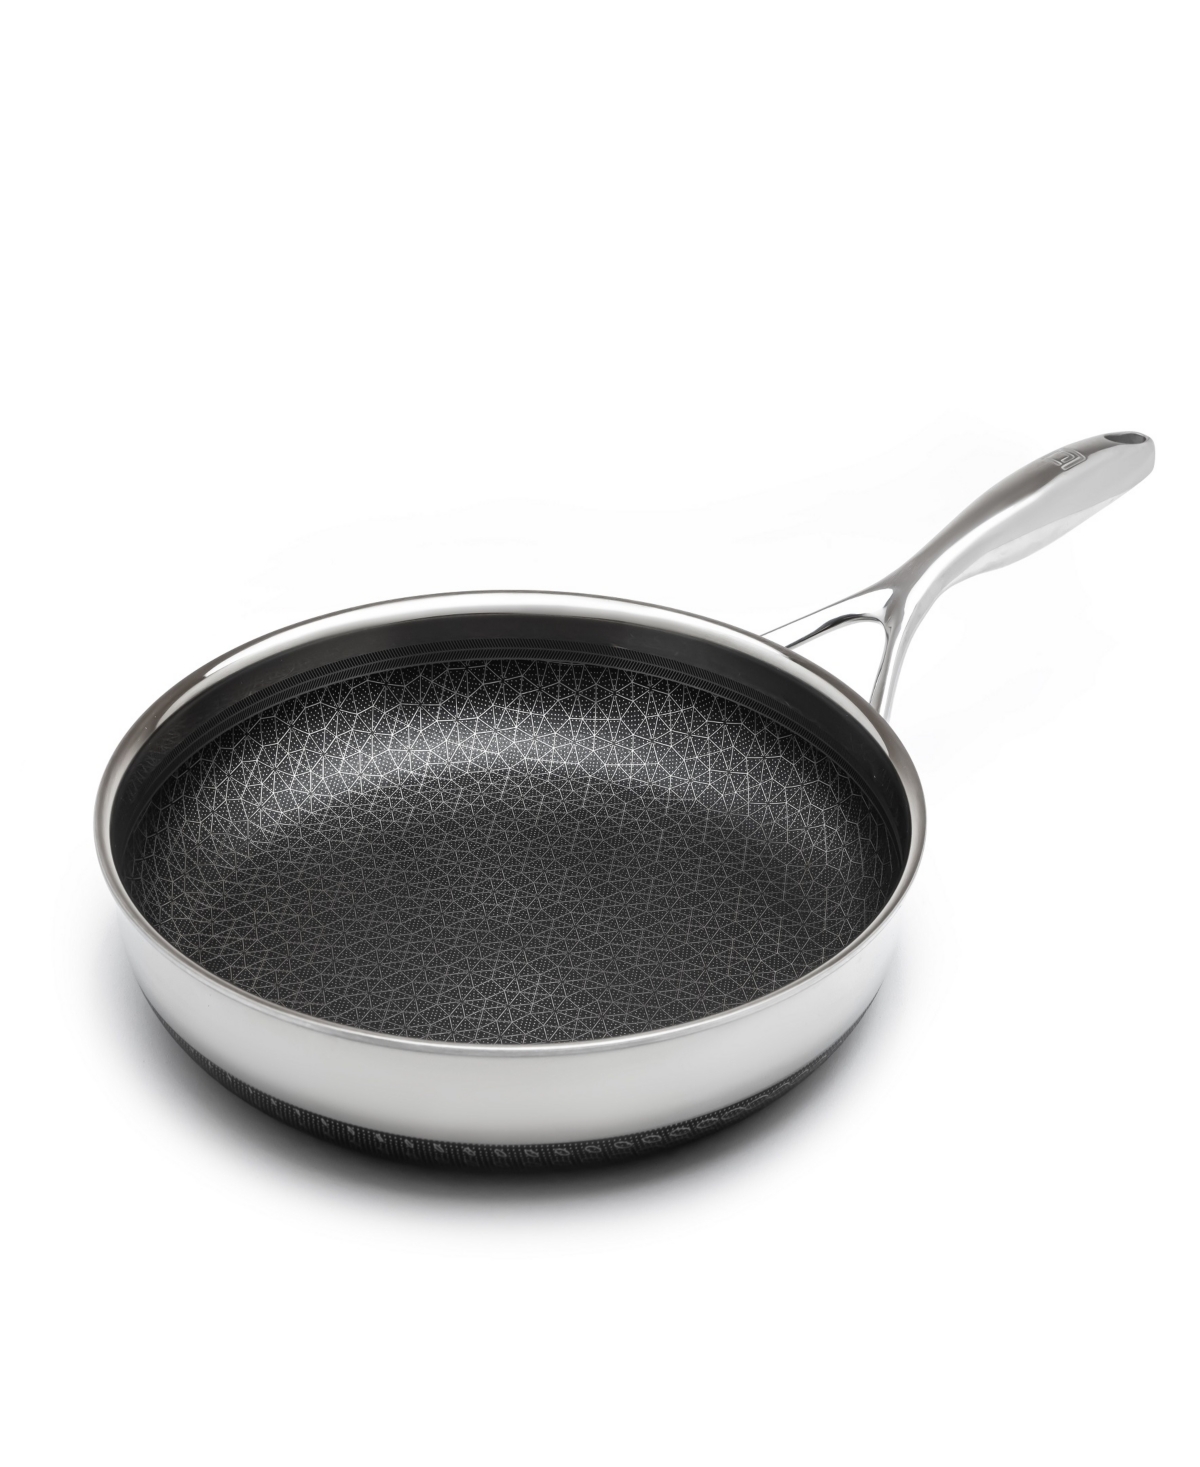 Livwell Diamondclad Stainless Steel Aluminum Core 12" Hybrid Pan In Silver,black